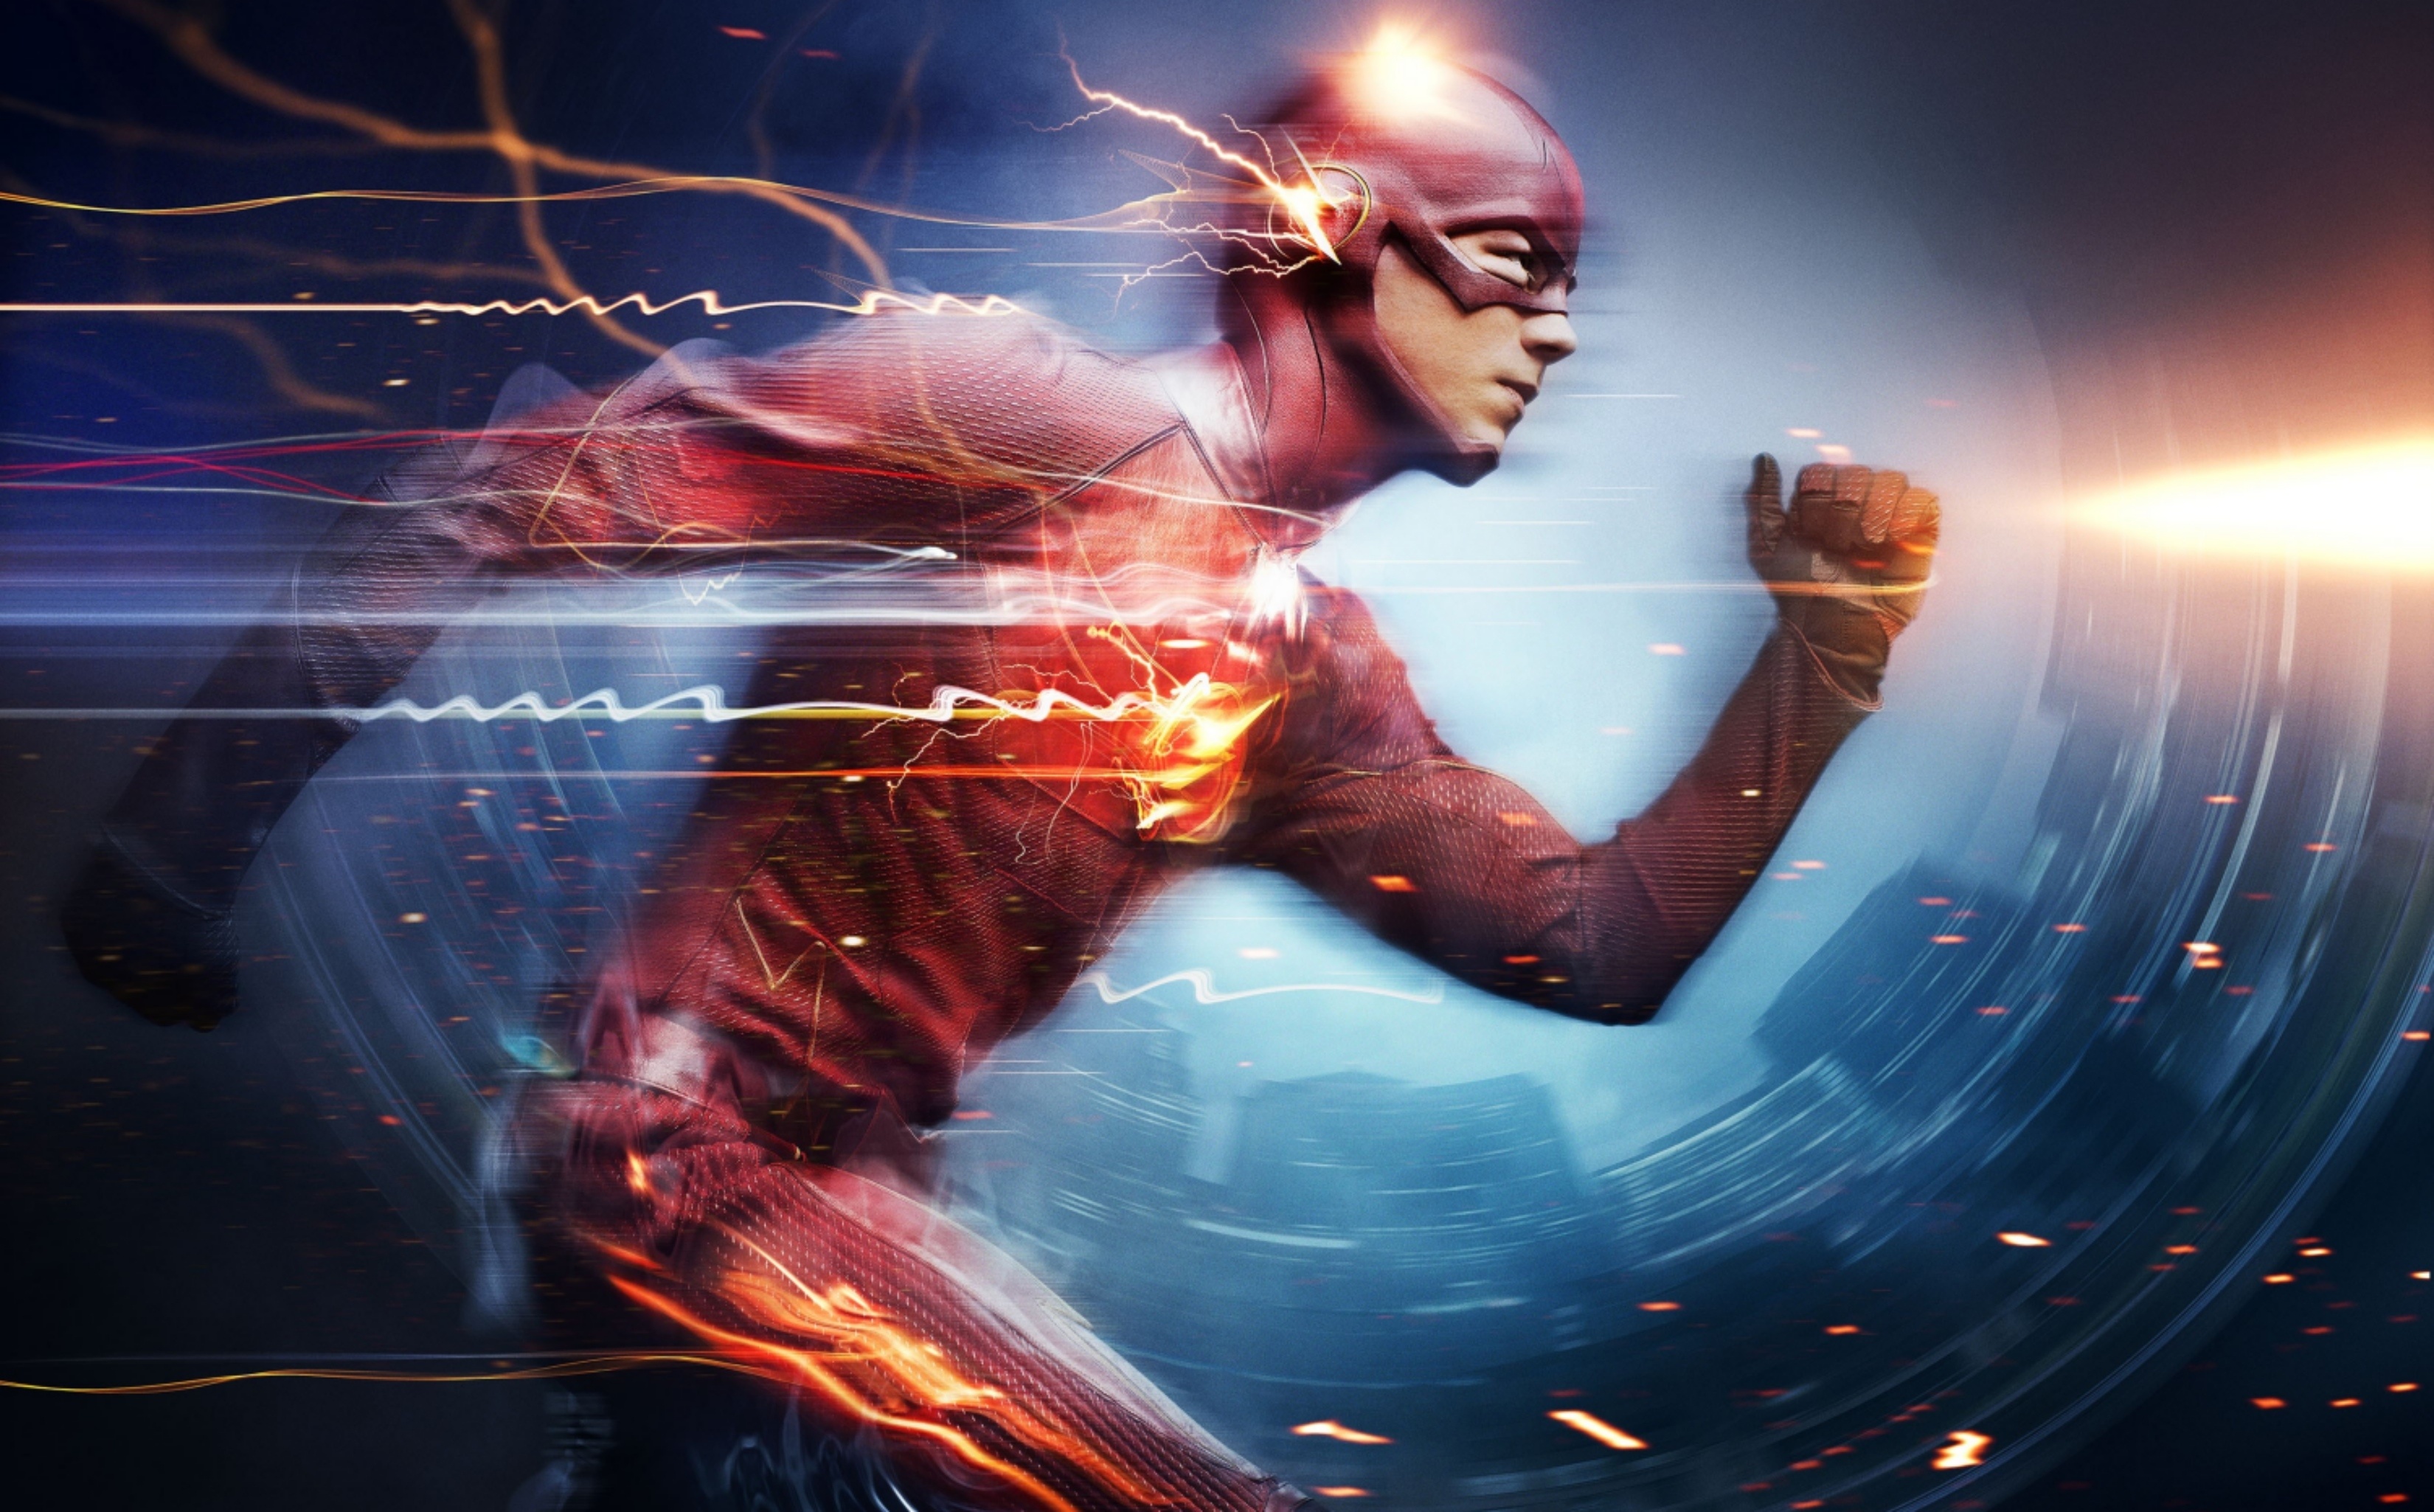 Grant Gustin: An American television series based on the Barry Allen incarnation of DC Comics character The Flash. 3300x2050 HD Wallpaper.